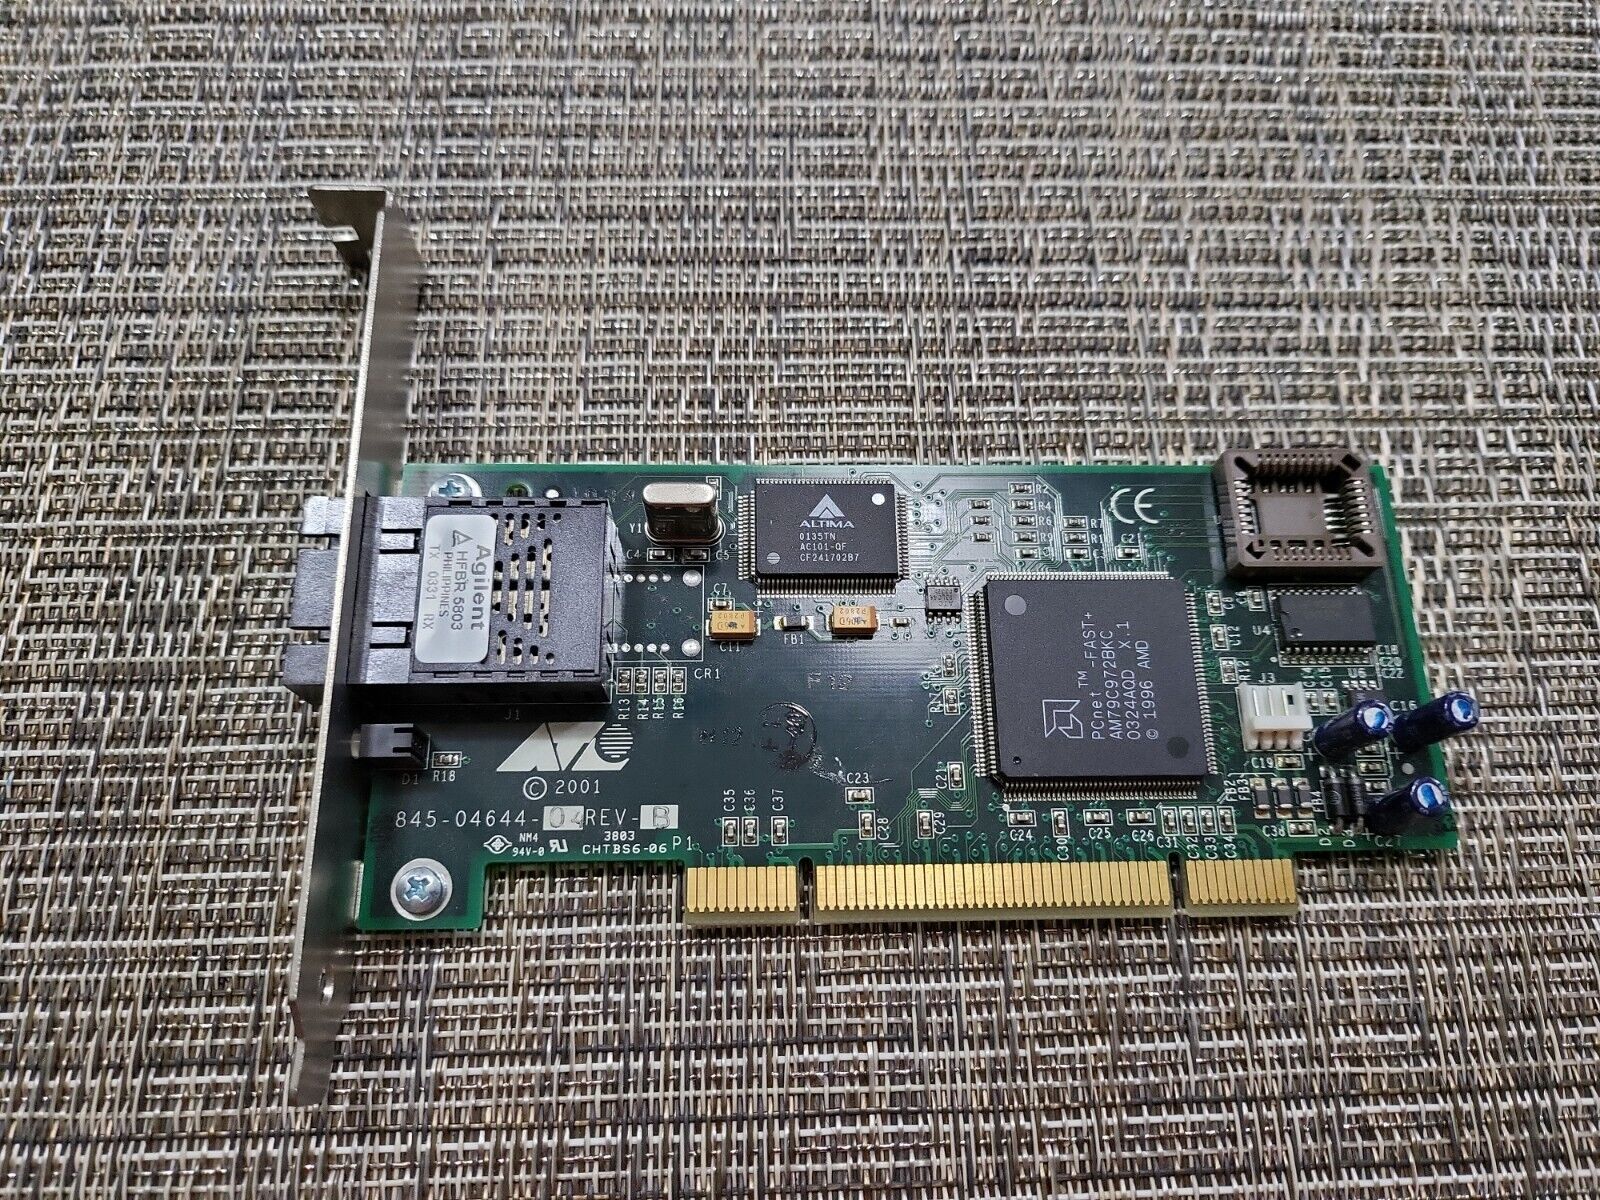 Allied Telesyn 100BFX PCI Adapter Card AT-2700FX (C1)